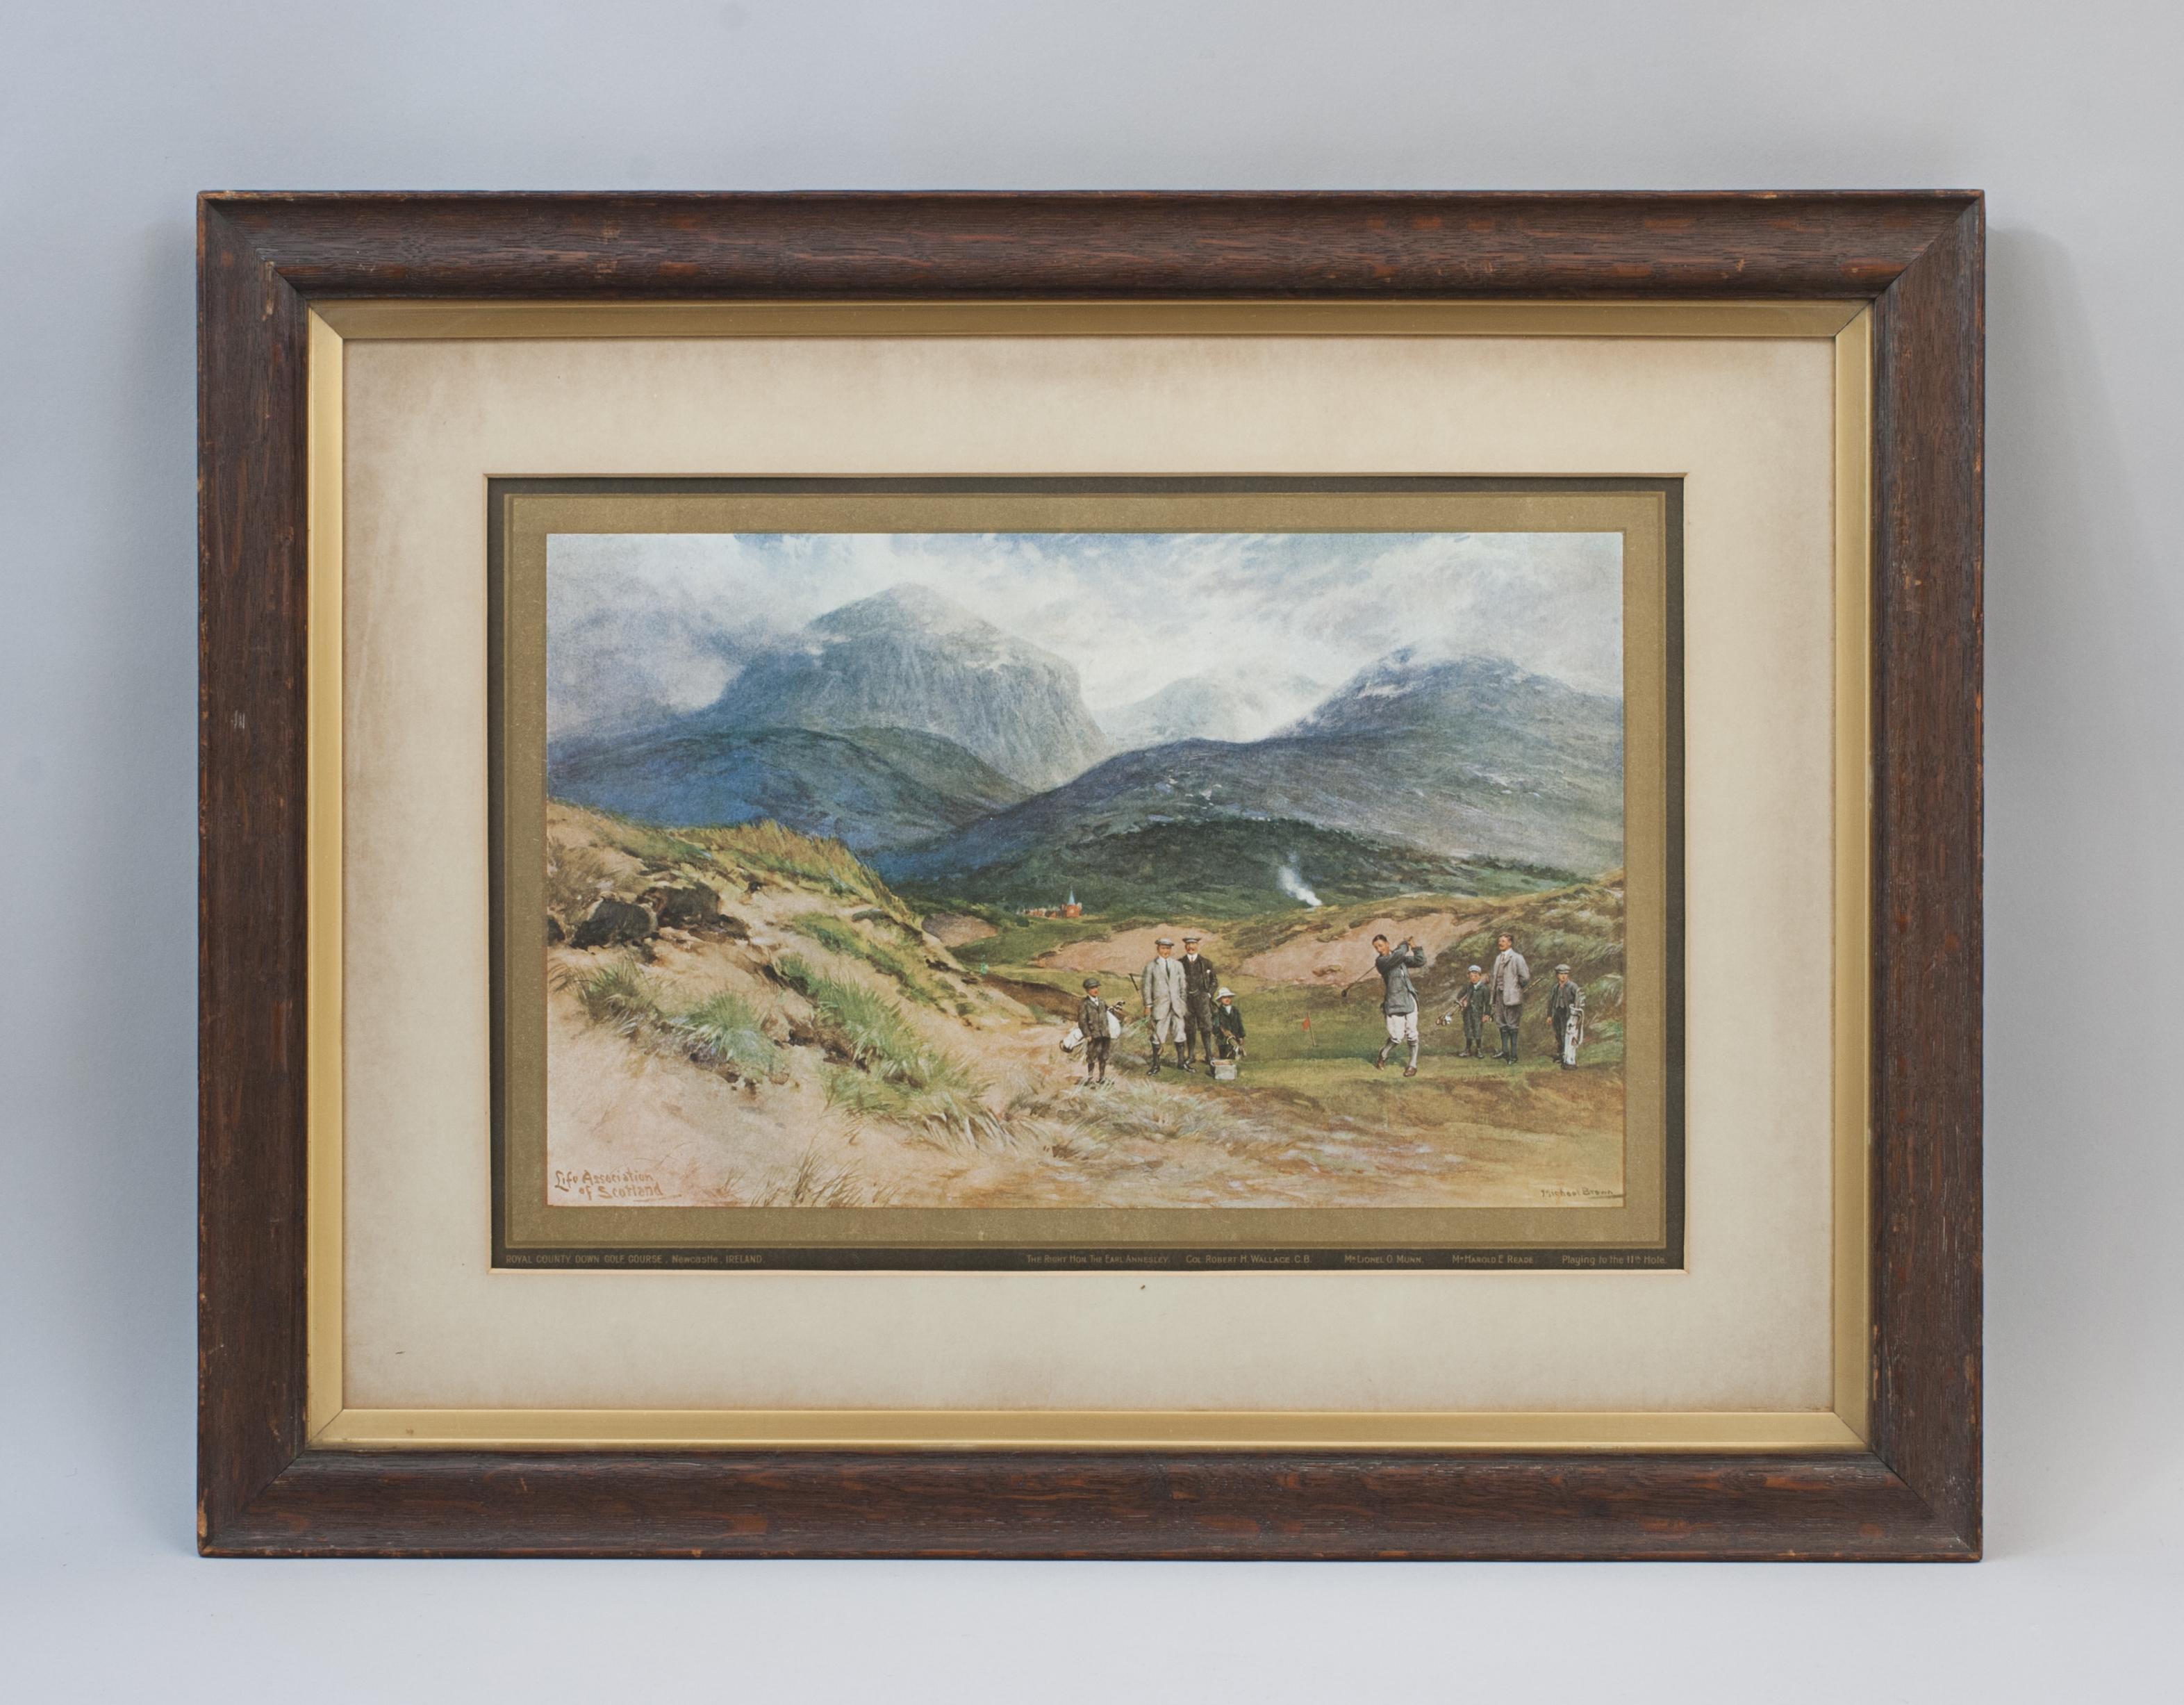 Royal County Down Golf Course.
A framed and mounted Life Association of Scotland 1914 calendar. The calendar is with a wonderful colourful golfing picture of Royal County Down Golf Course, the picture is taken from the painting by Michael Brown. The